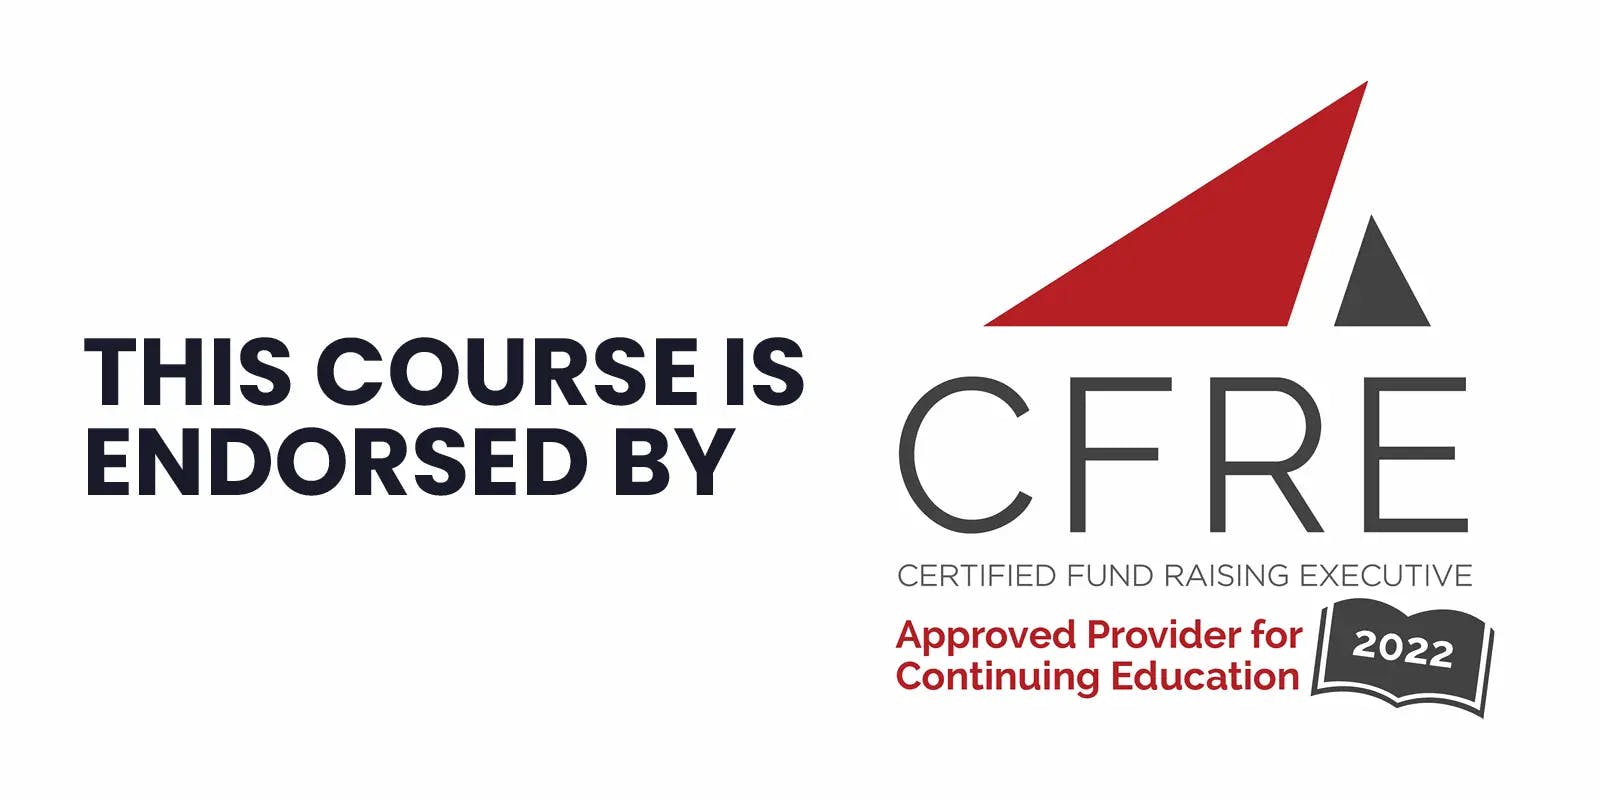 This course is endorsed by CFRE